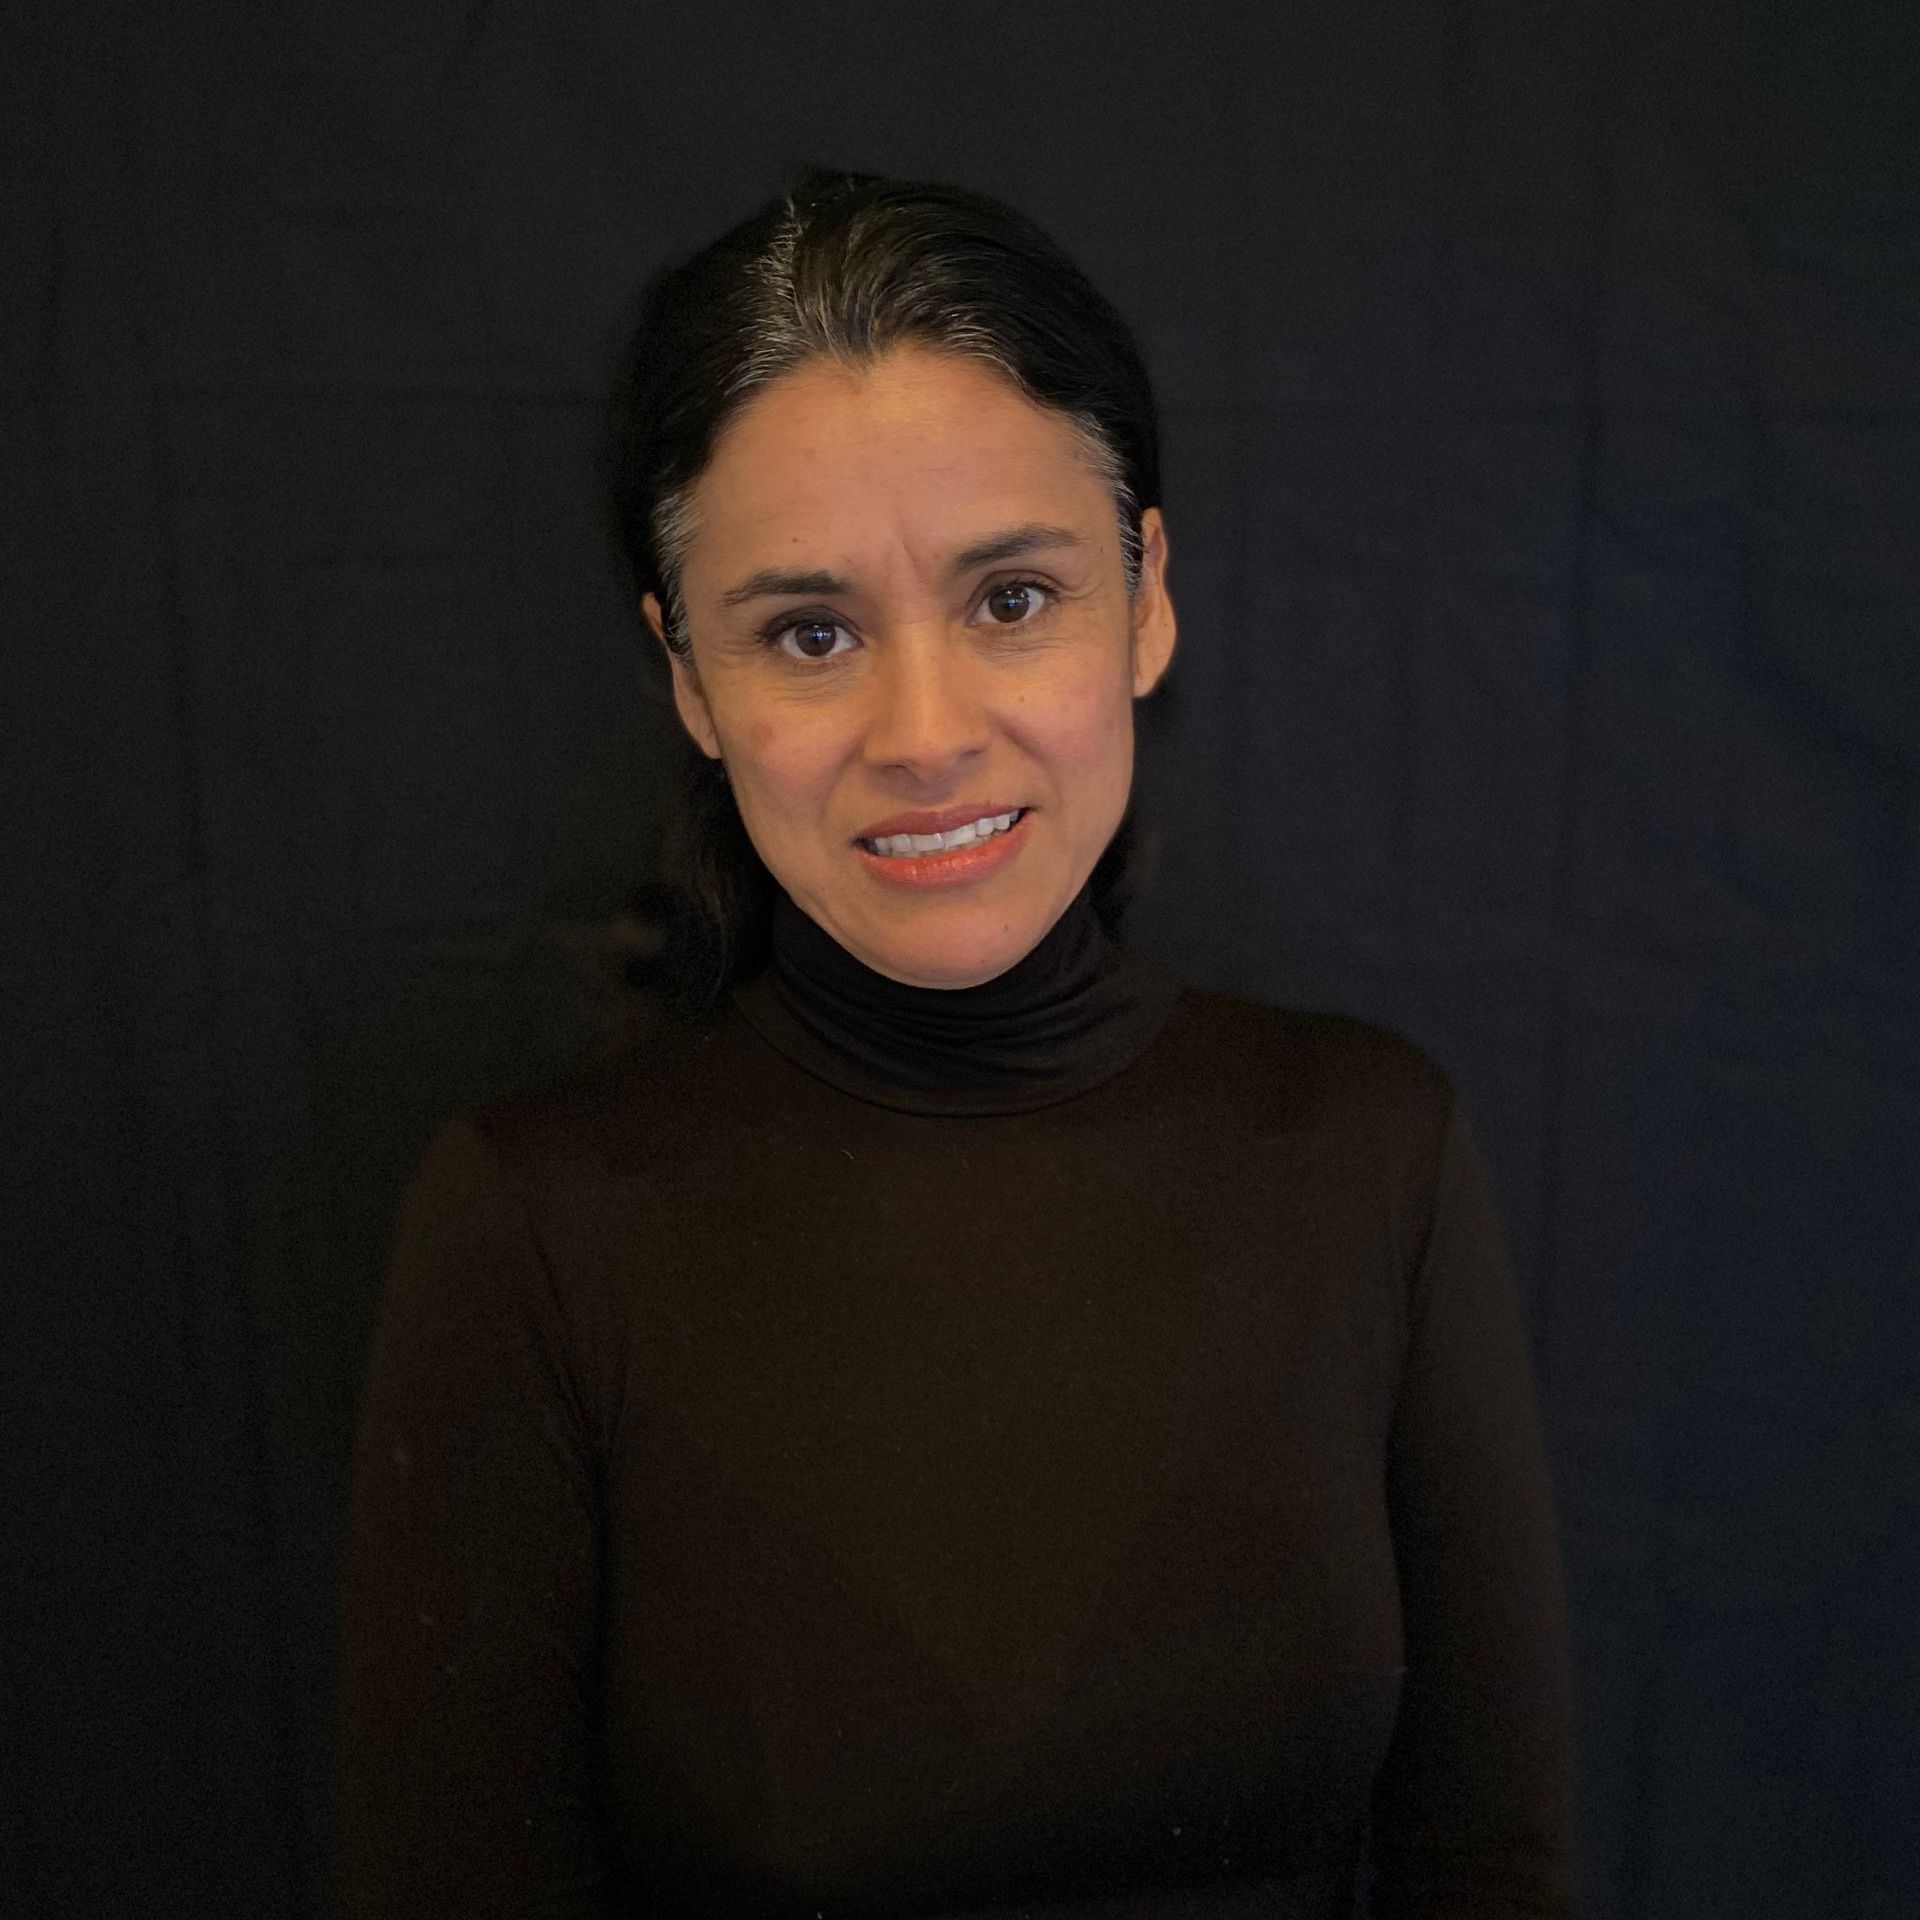 A woman wearing a brown turtleneck is smiling for the camera